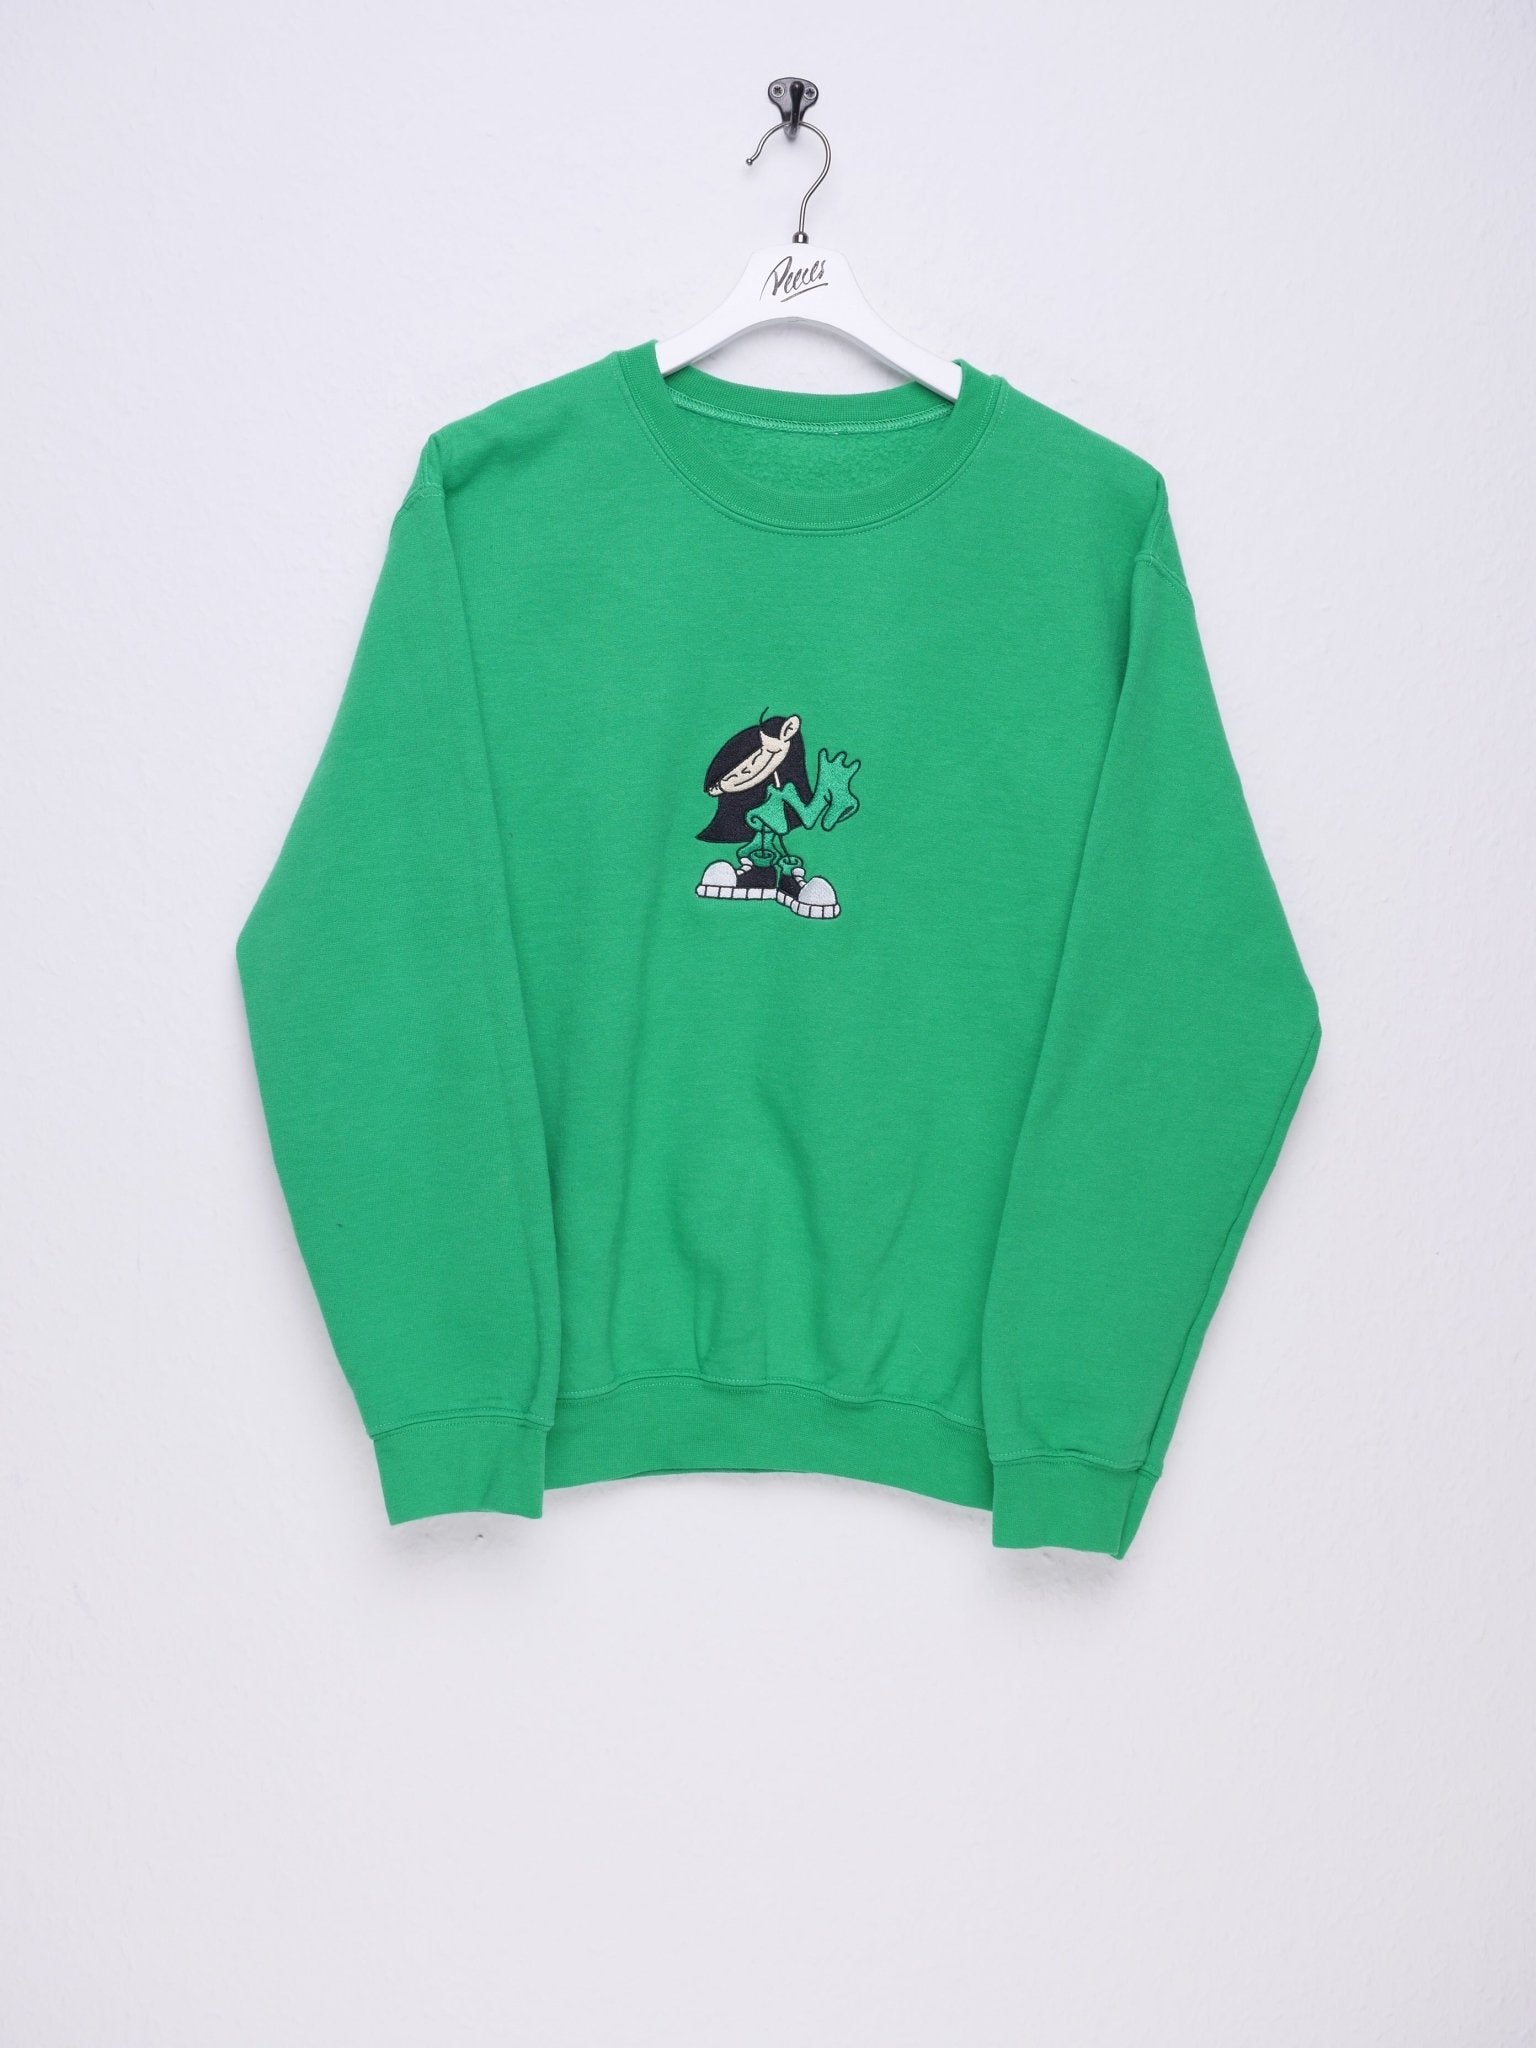 Girl with big Shoes embroidered Graphic Vintage Sweater - Peeces